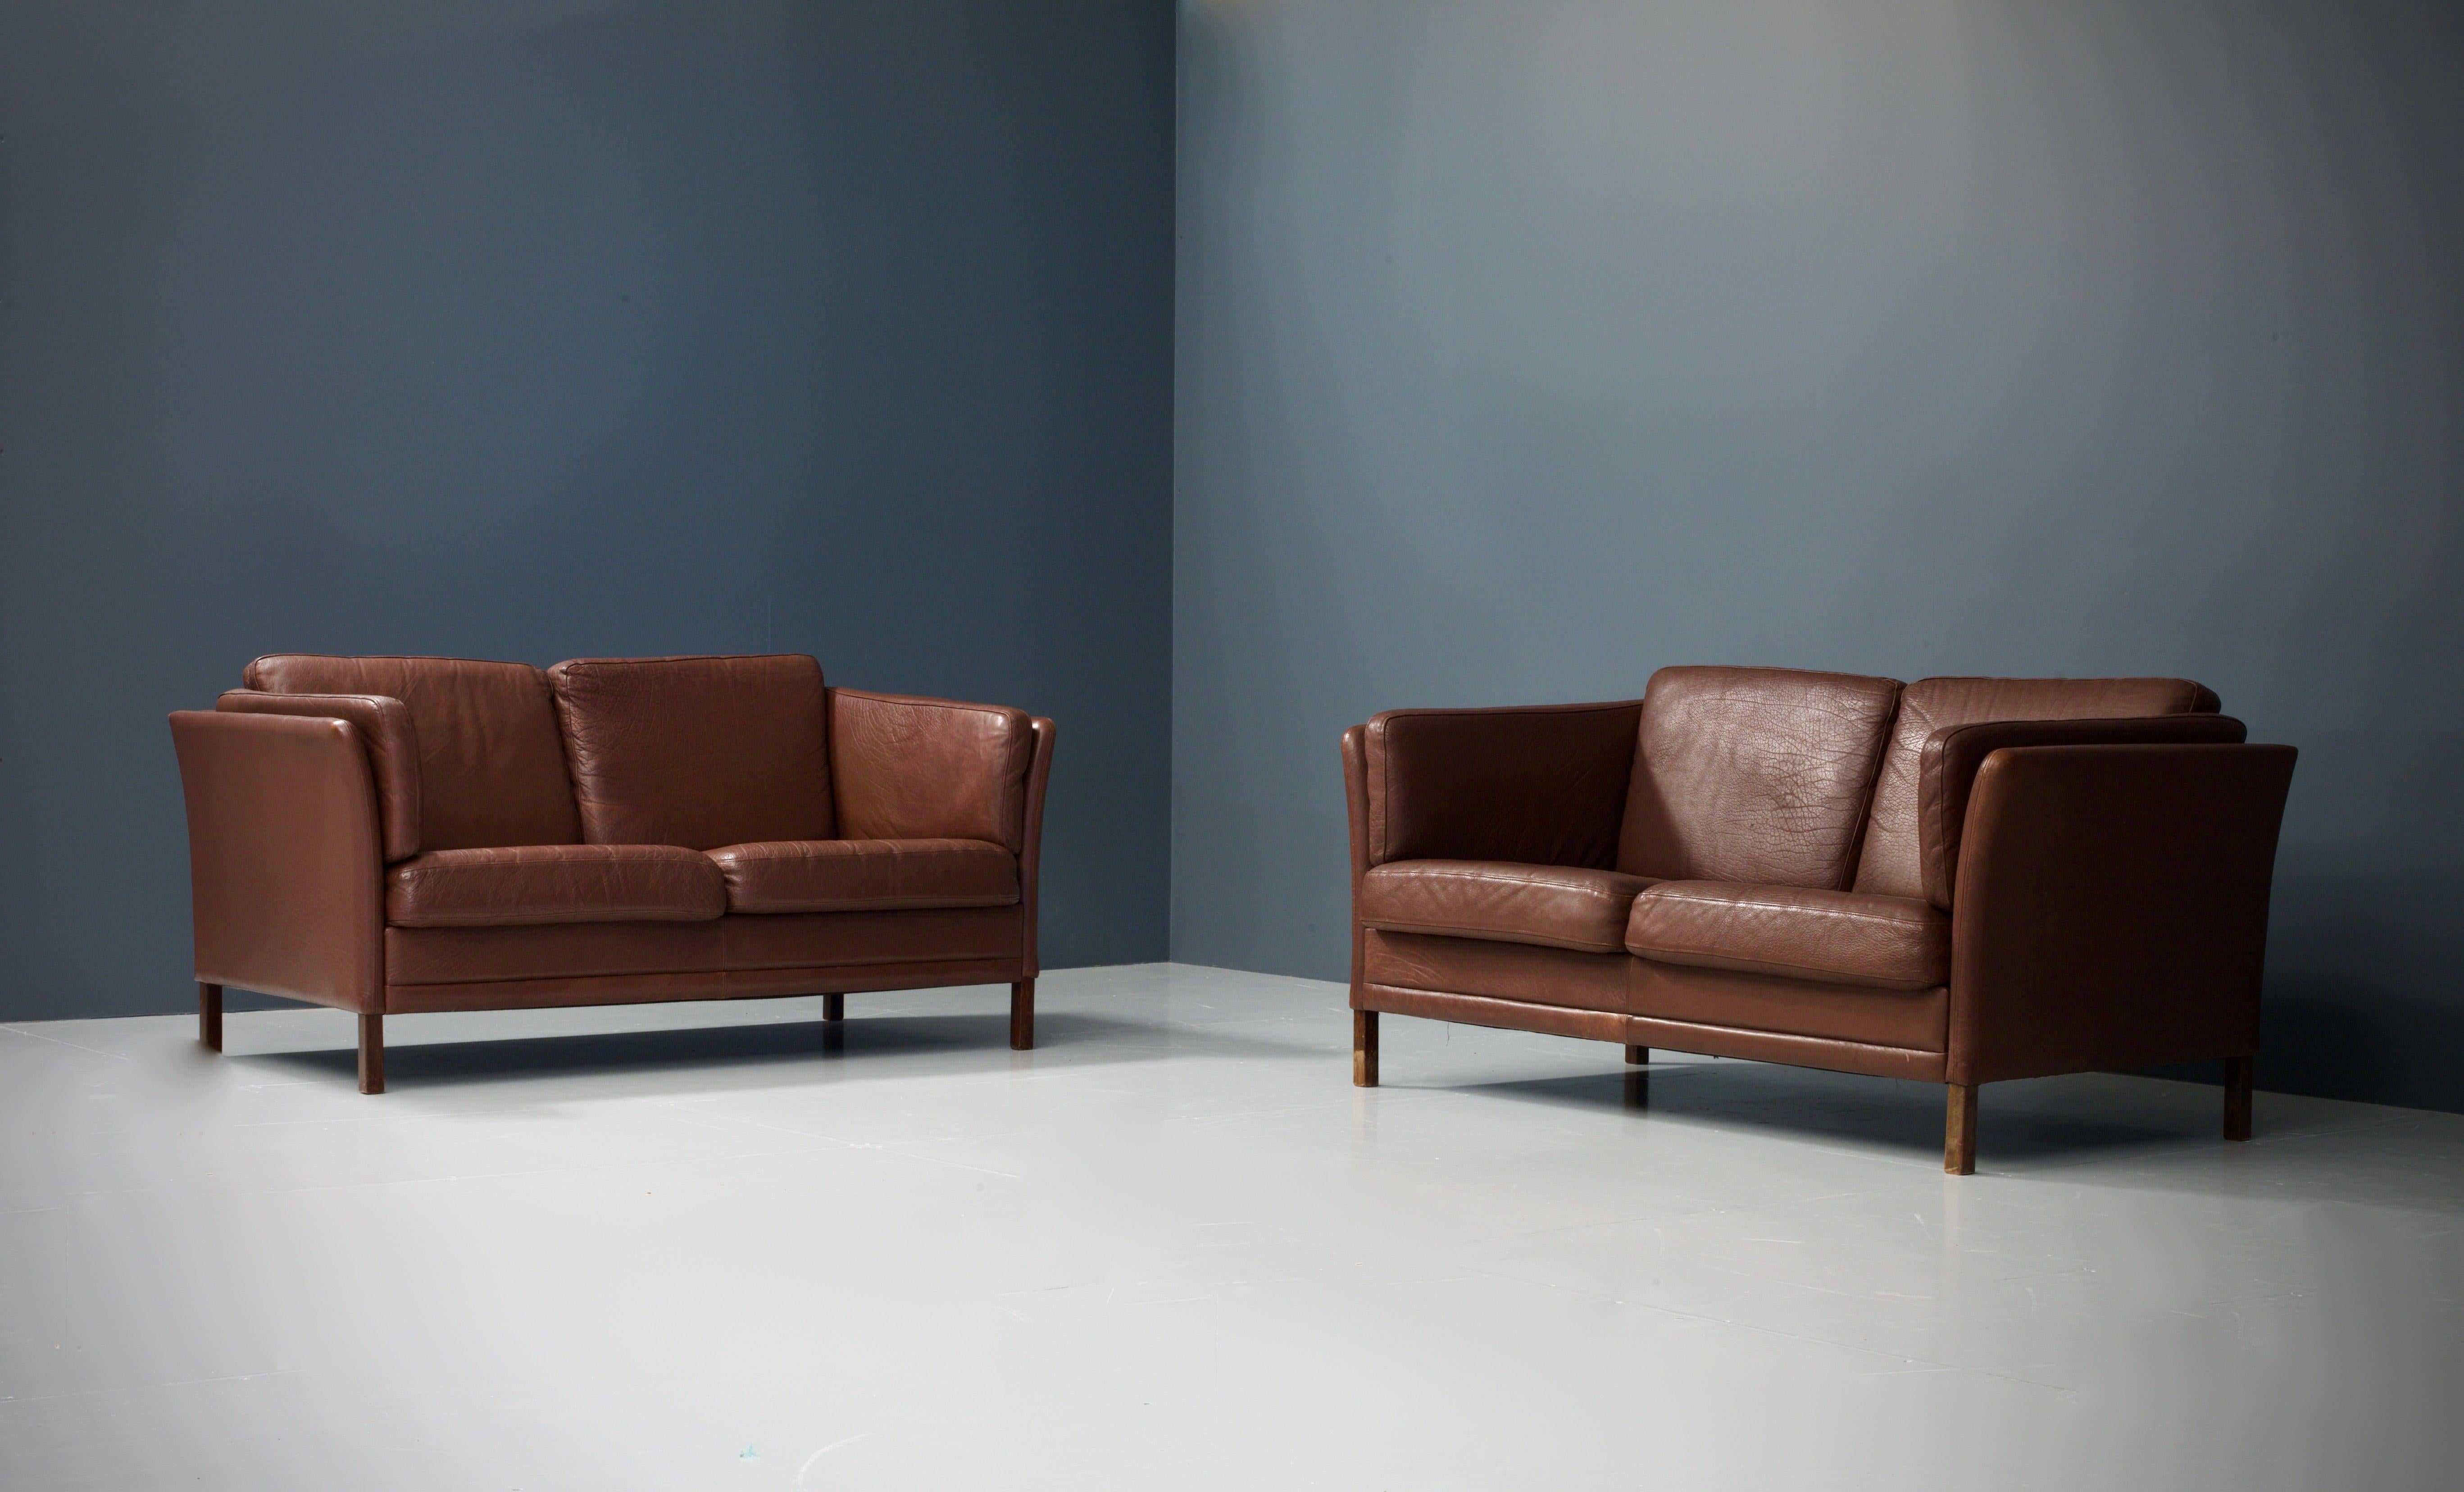 These exceptional aubergine colored sofas from the sixties are made to the very high standard expected of one of Denmark's foremost furniture makers, Mogens Hansen. The design is minimalistic in shape, but you can find a lot of attention for detail,